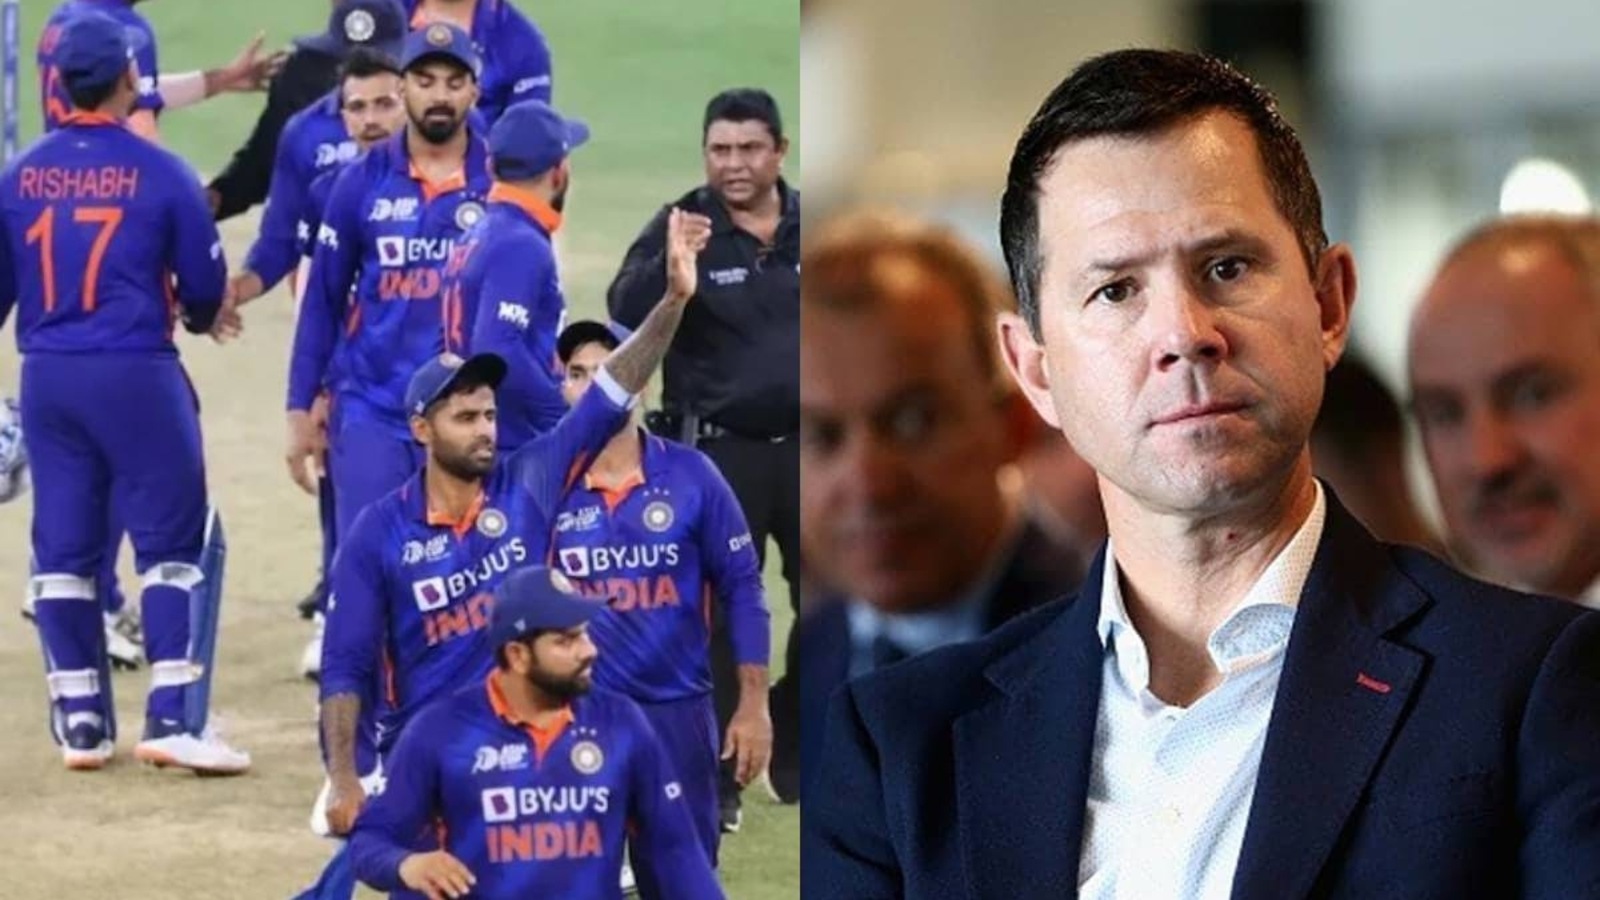 india-star-reacts-to-ricky-ponting-s-his-playing-days-were-over-statement-on-him-ahead-of-t20-world-cup